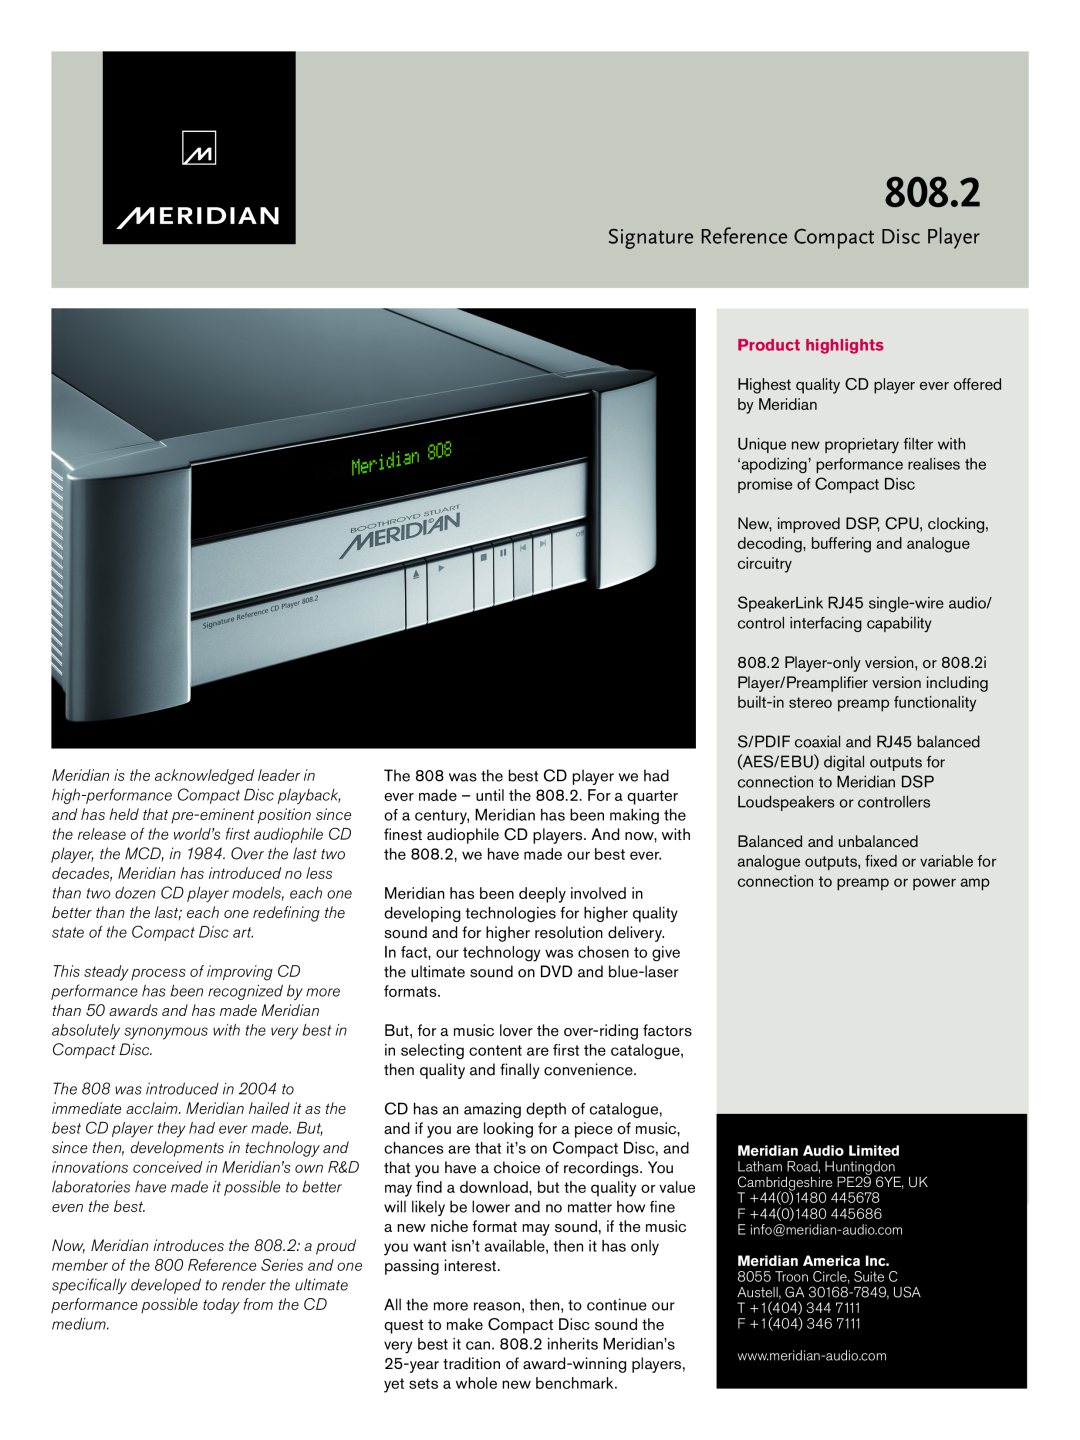 Meridian Audio 808.2 manual Signature Reference Compact Disc Player, Product highlights 